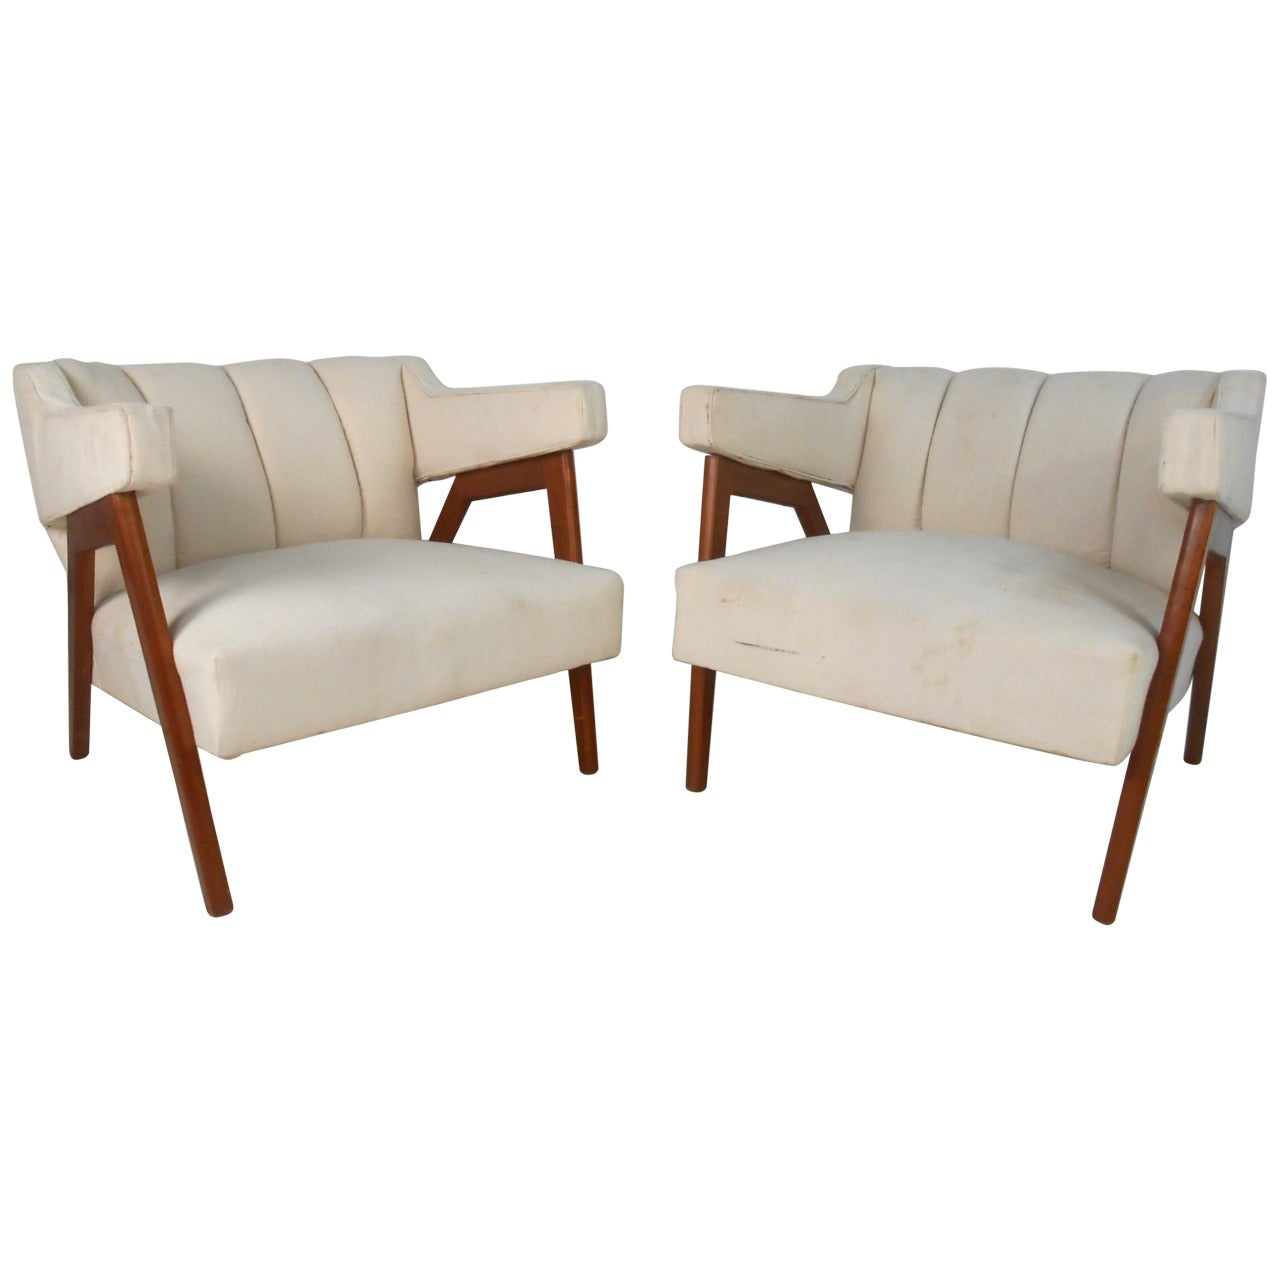 Pair of Tufted Mid-Century Modern Canvas Club Chairs